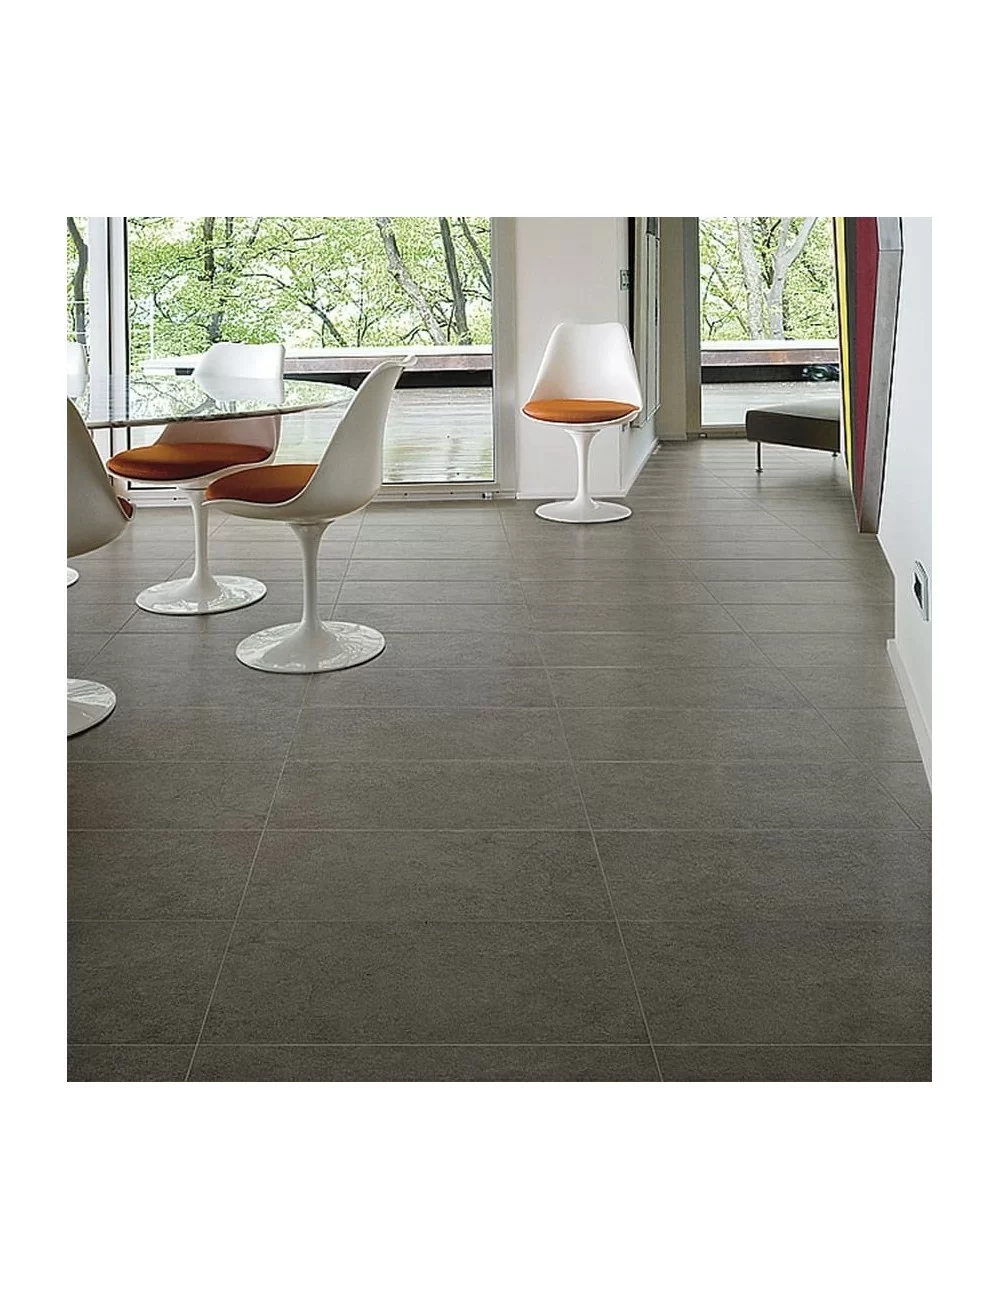 neutra rectified lead cement-effect stoneware tile dark grey colour